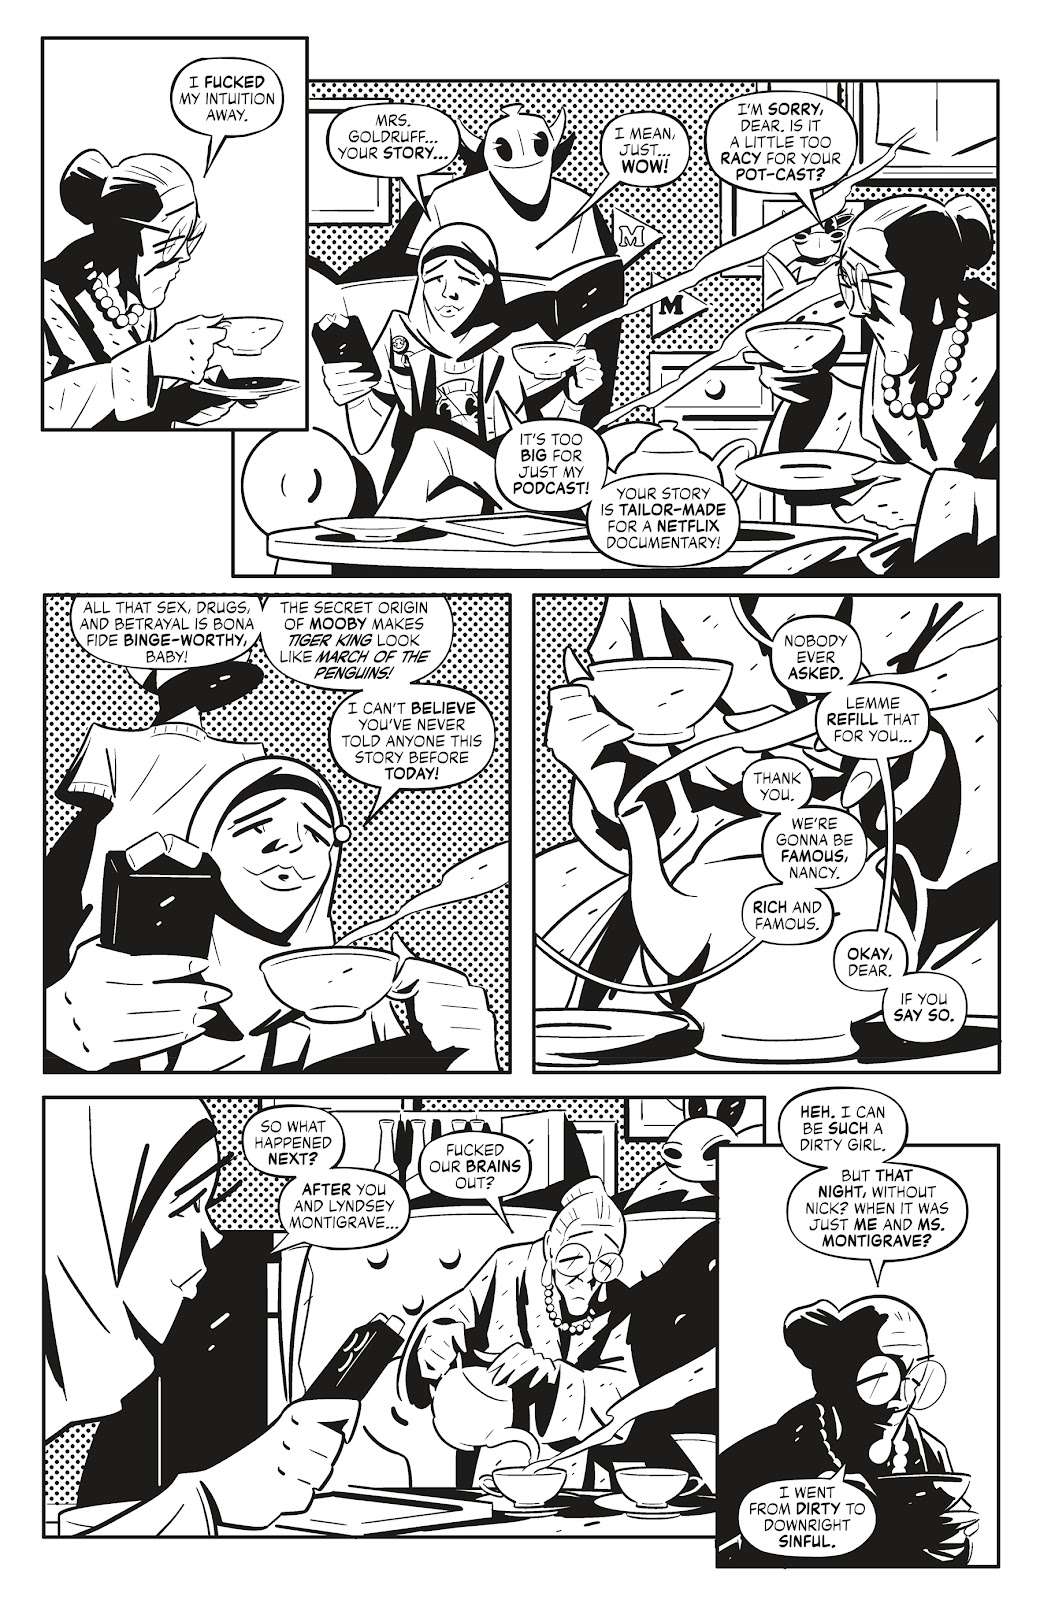 Quick Stops Vol. 2 issue 2 - Page 14